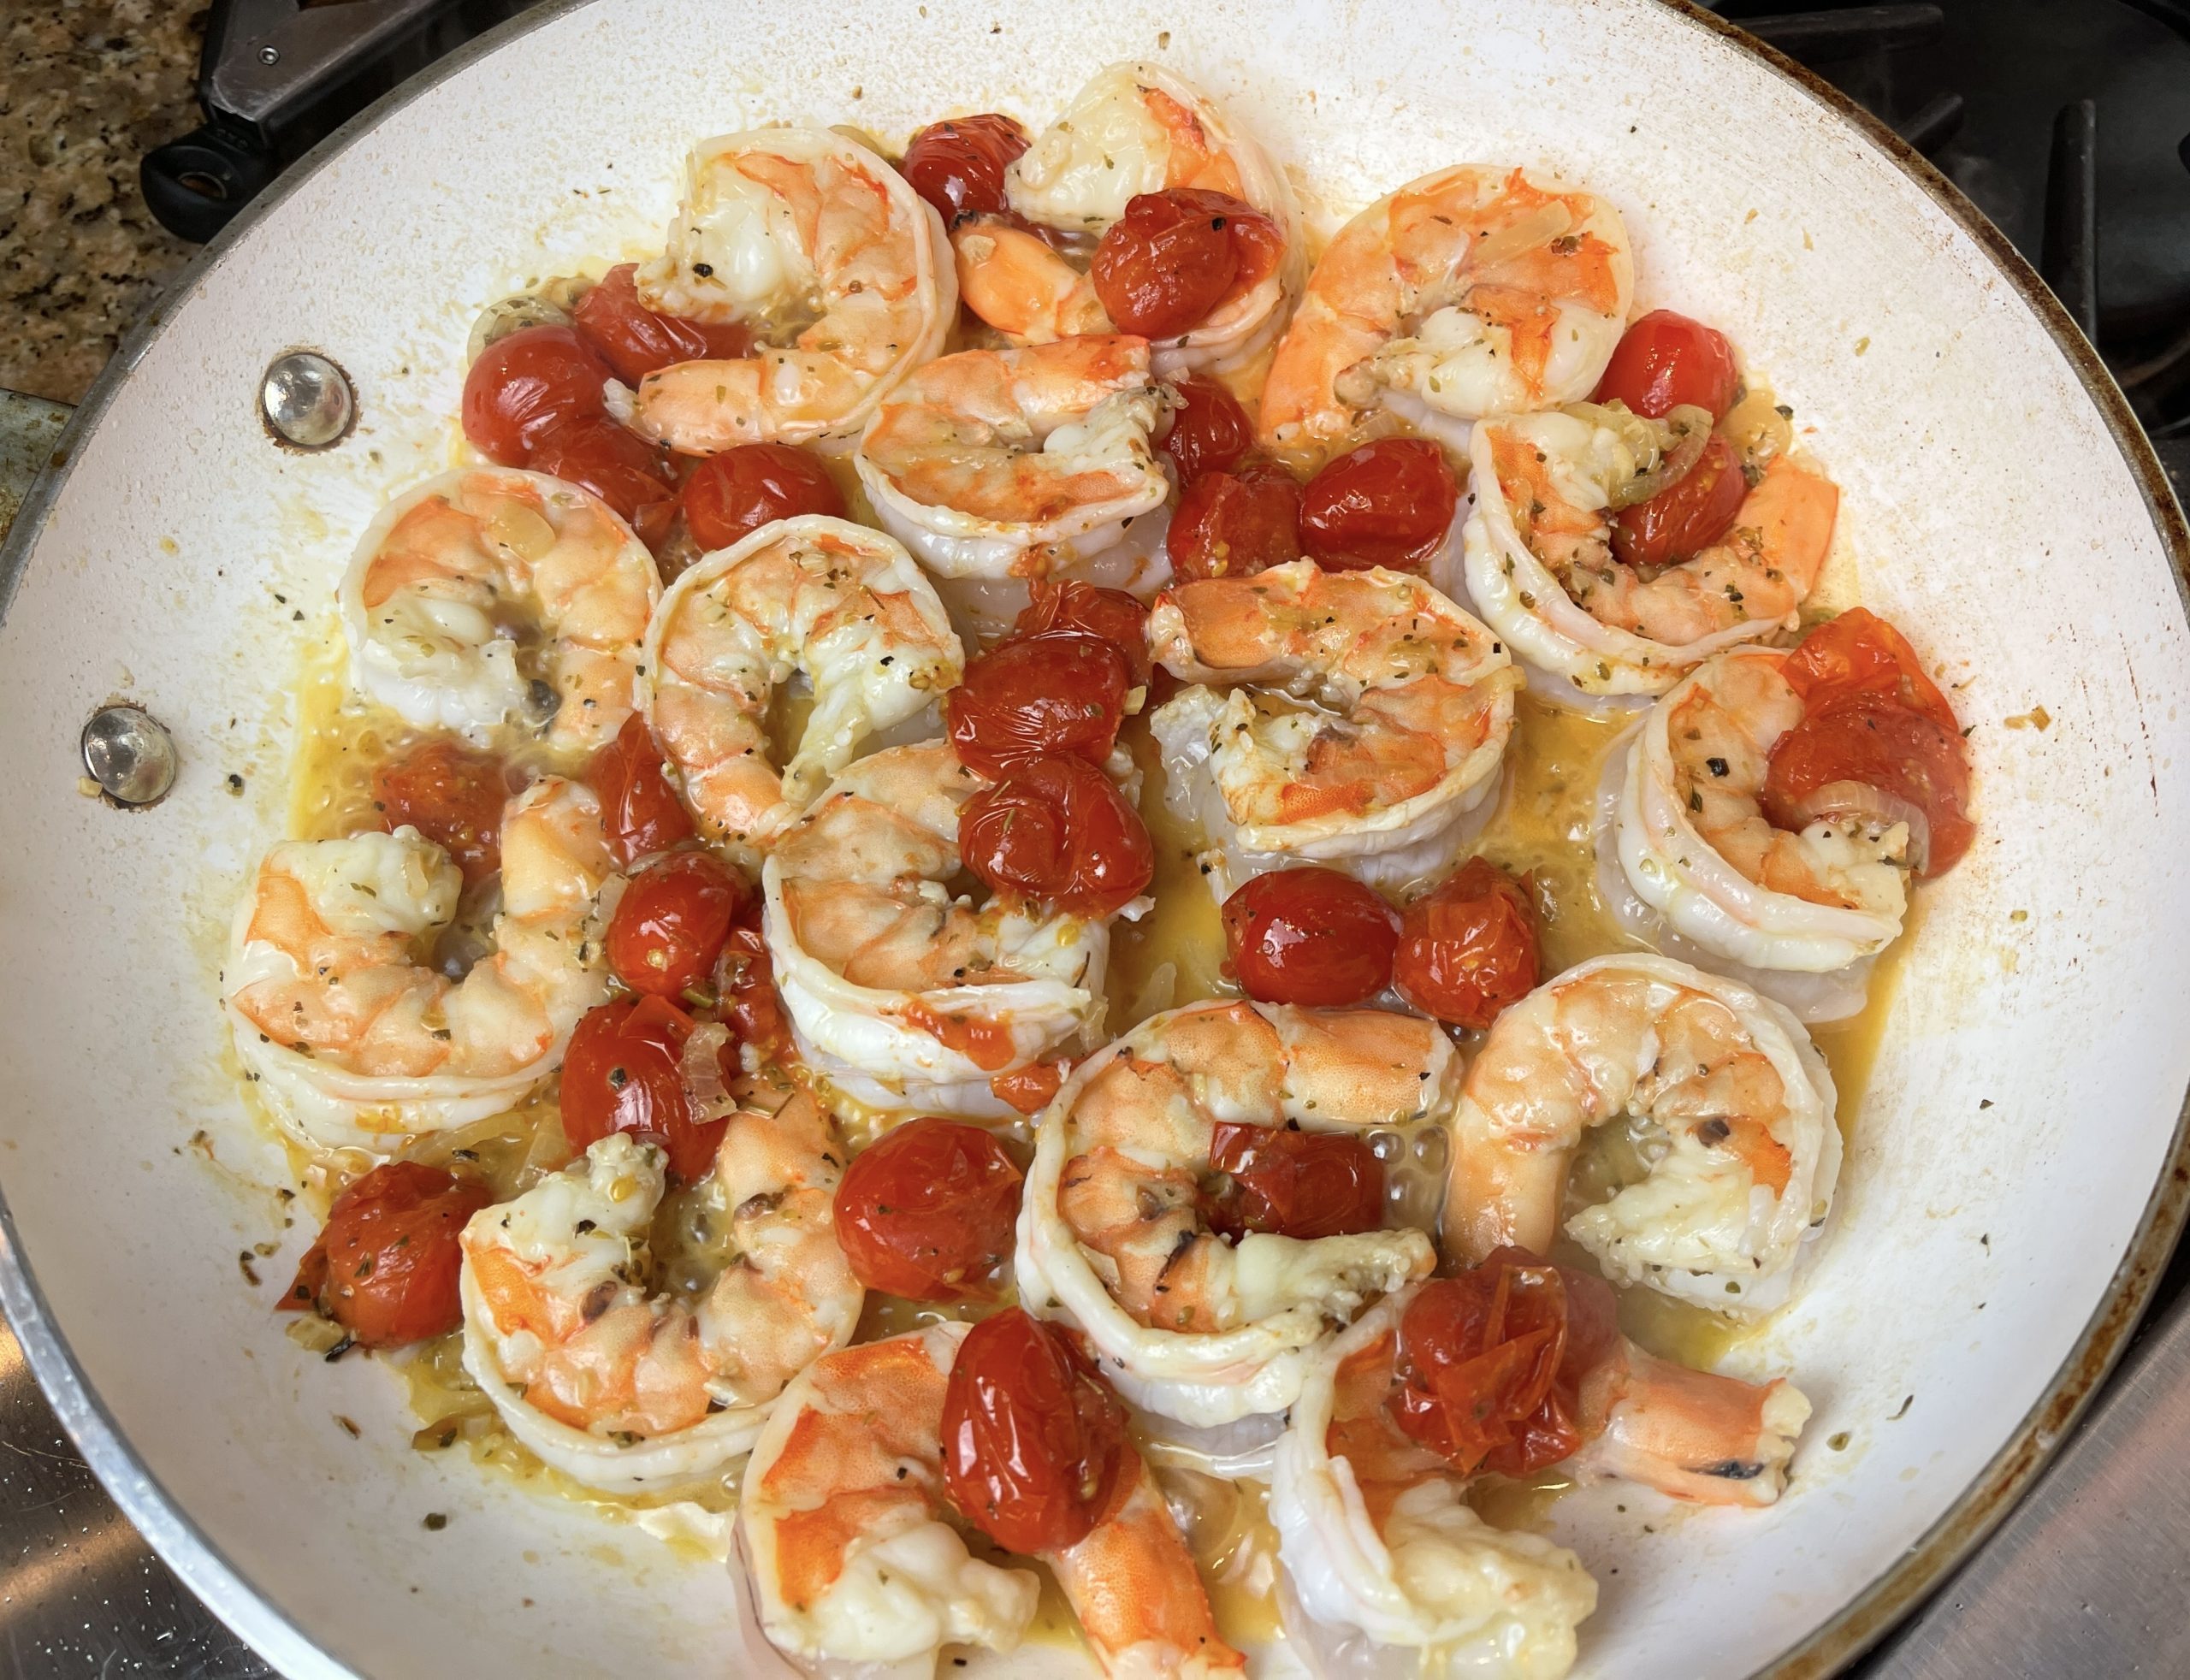 add the shrimp and cook until the shrimp turn pinkis-orange from grey, approx 1 1/2 mins per side